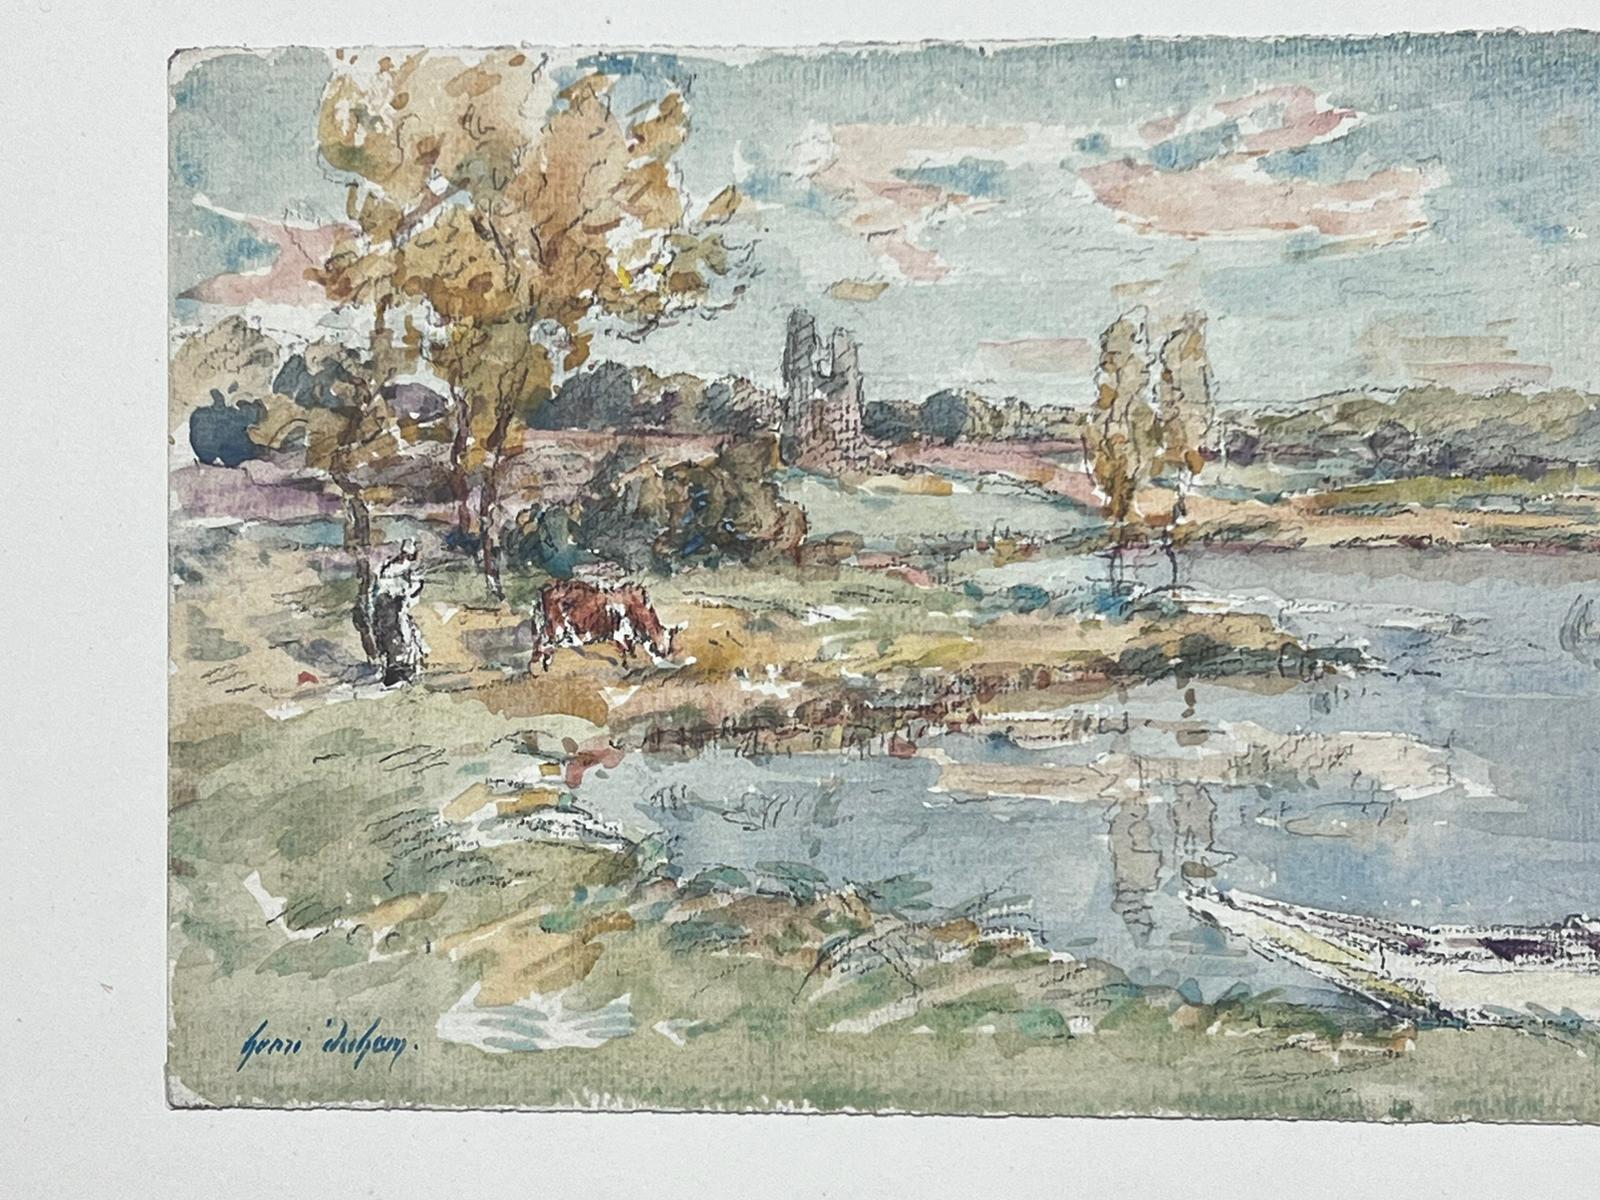 The artist: 
Henri Aime Duhem (1860-1941) French *see notes below, signed 

Title: The River Landscape

Medium:  
signed gouache on paper, loosely laid over card, unframed

card: 9.75 x 13 inches
painting: 4.5 x 7 inches

Provenance: 
private